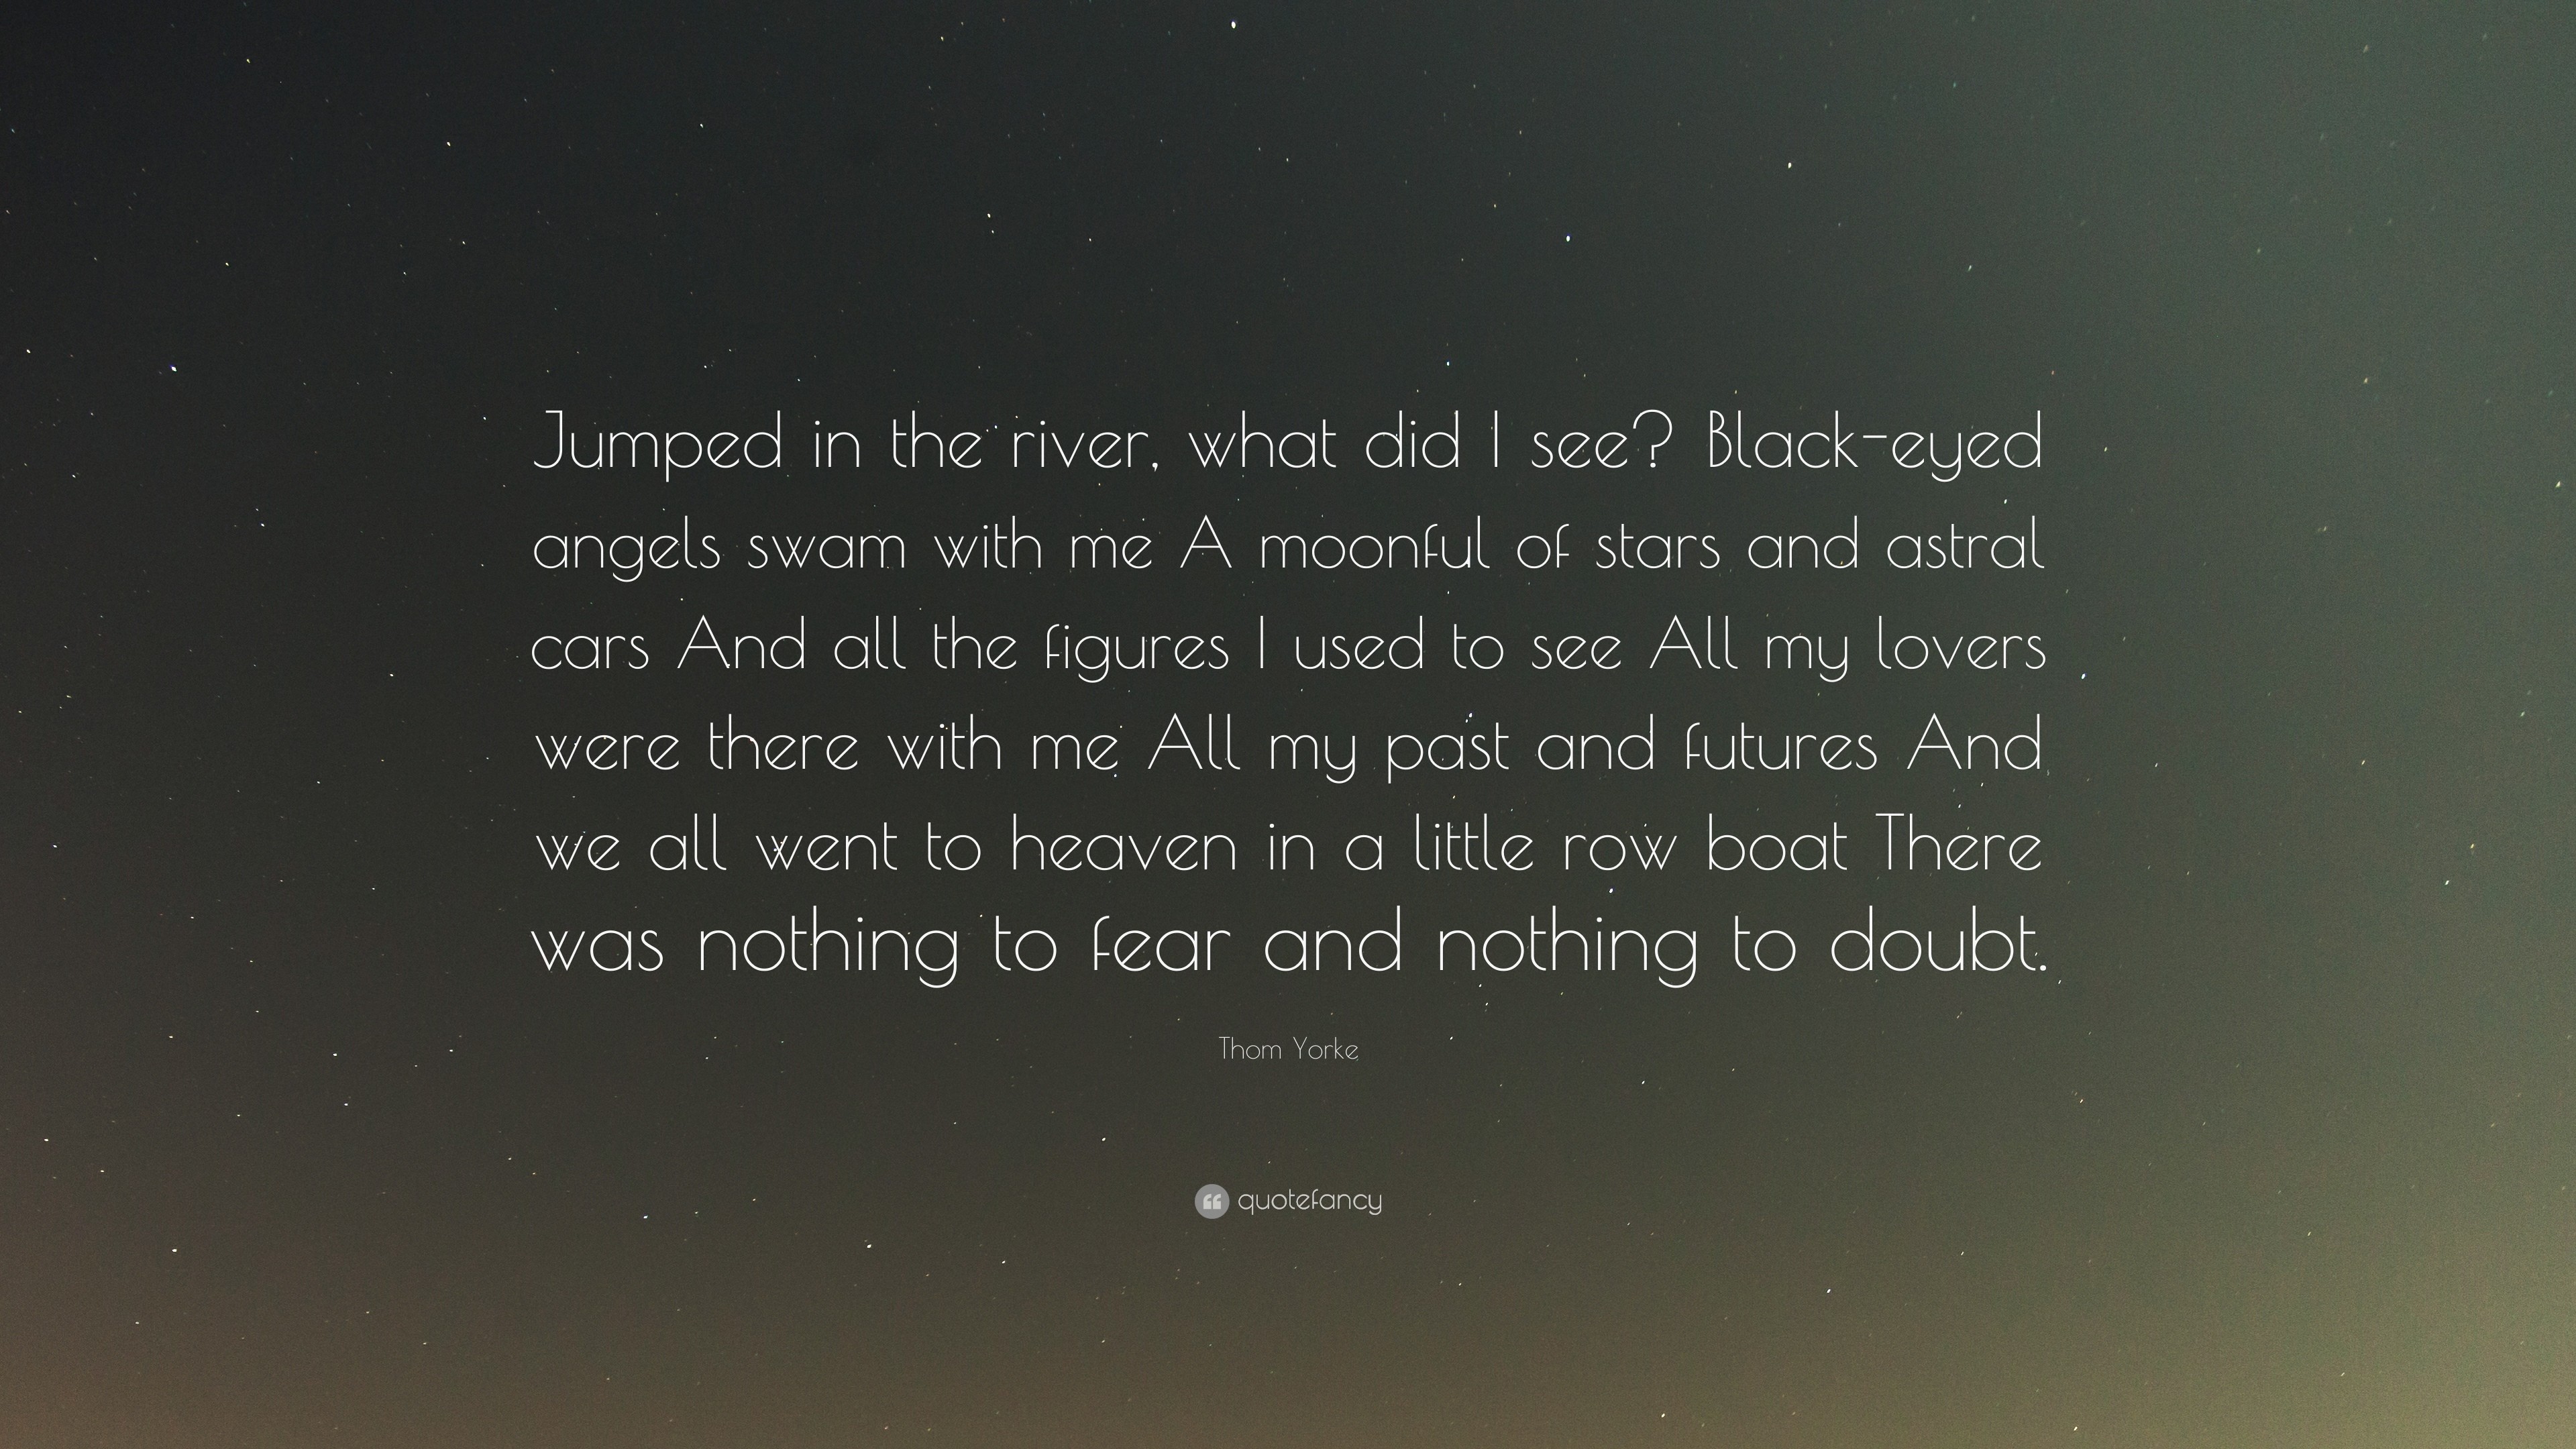 3840x2160 Thom Yorke Quote: “Jumped in the river, what did I see? Black